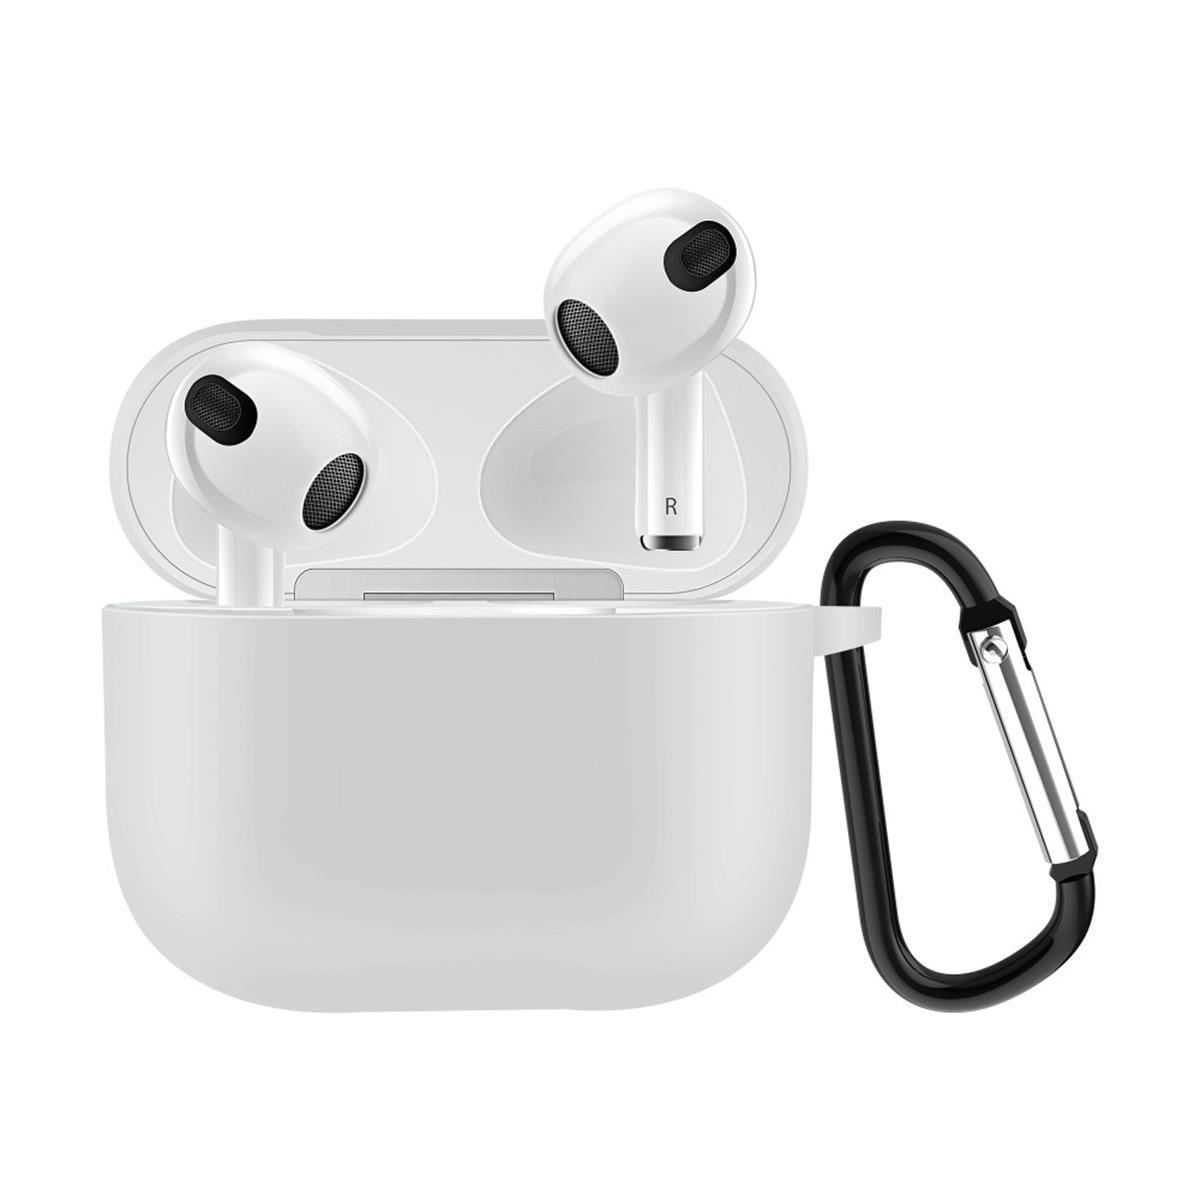 COVERKINGZ Silikoncover Ladecase Apple 3 Unisex, 76801 für AirPods Weiß